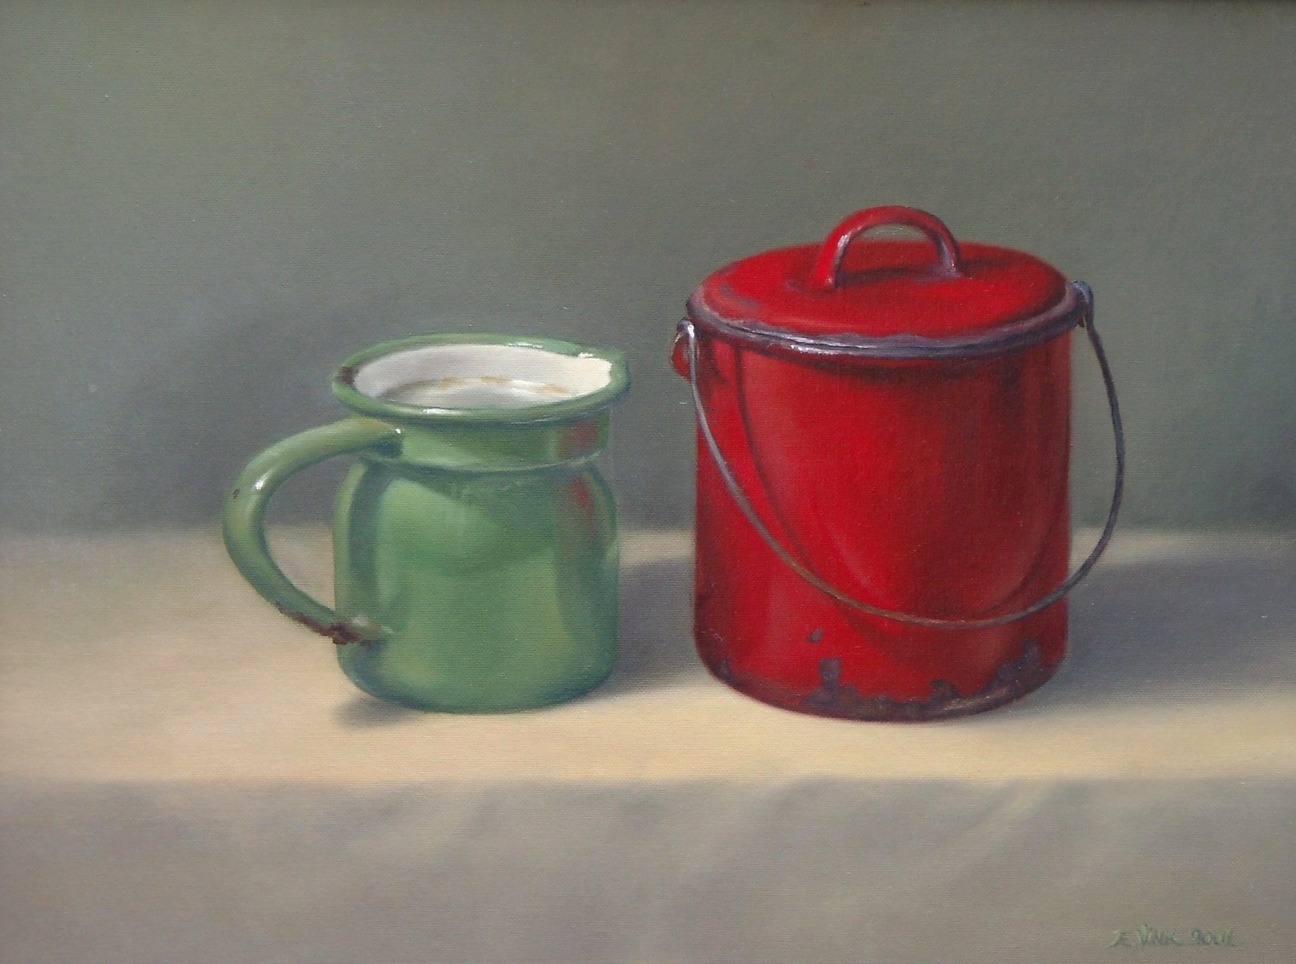 Still-life painting with a green can and a red pot. Made by Els Vink.